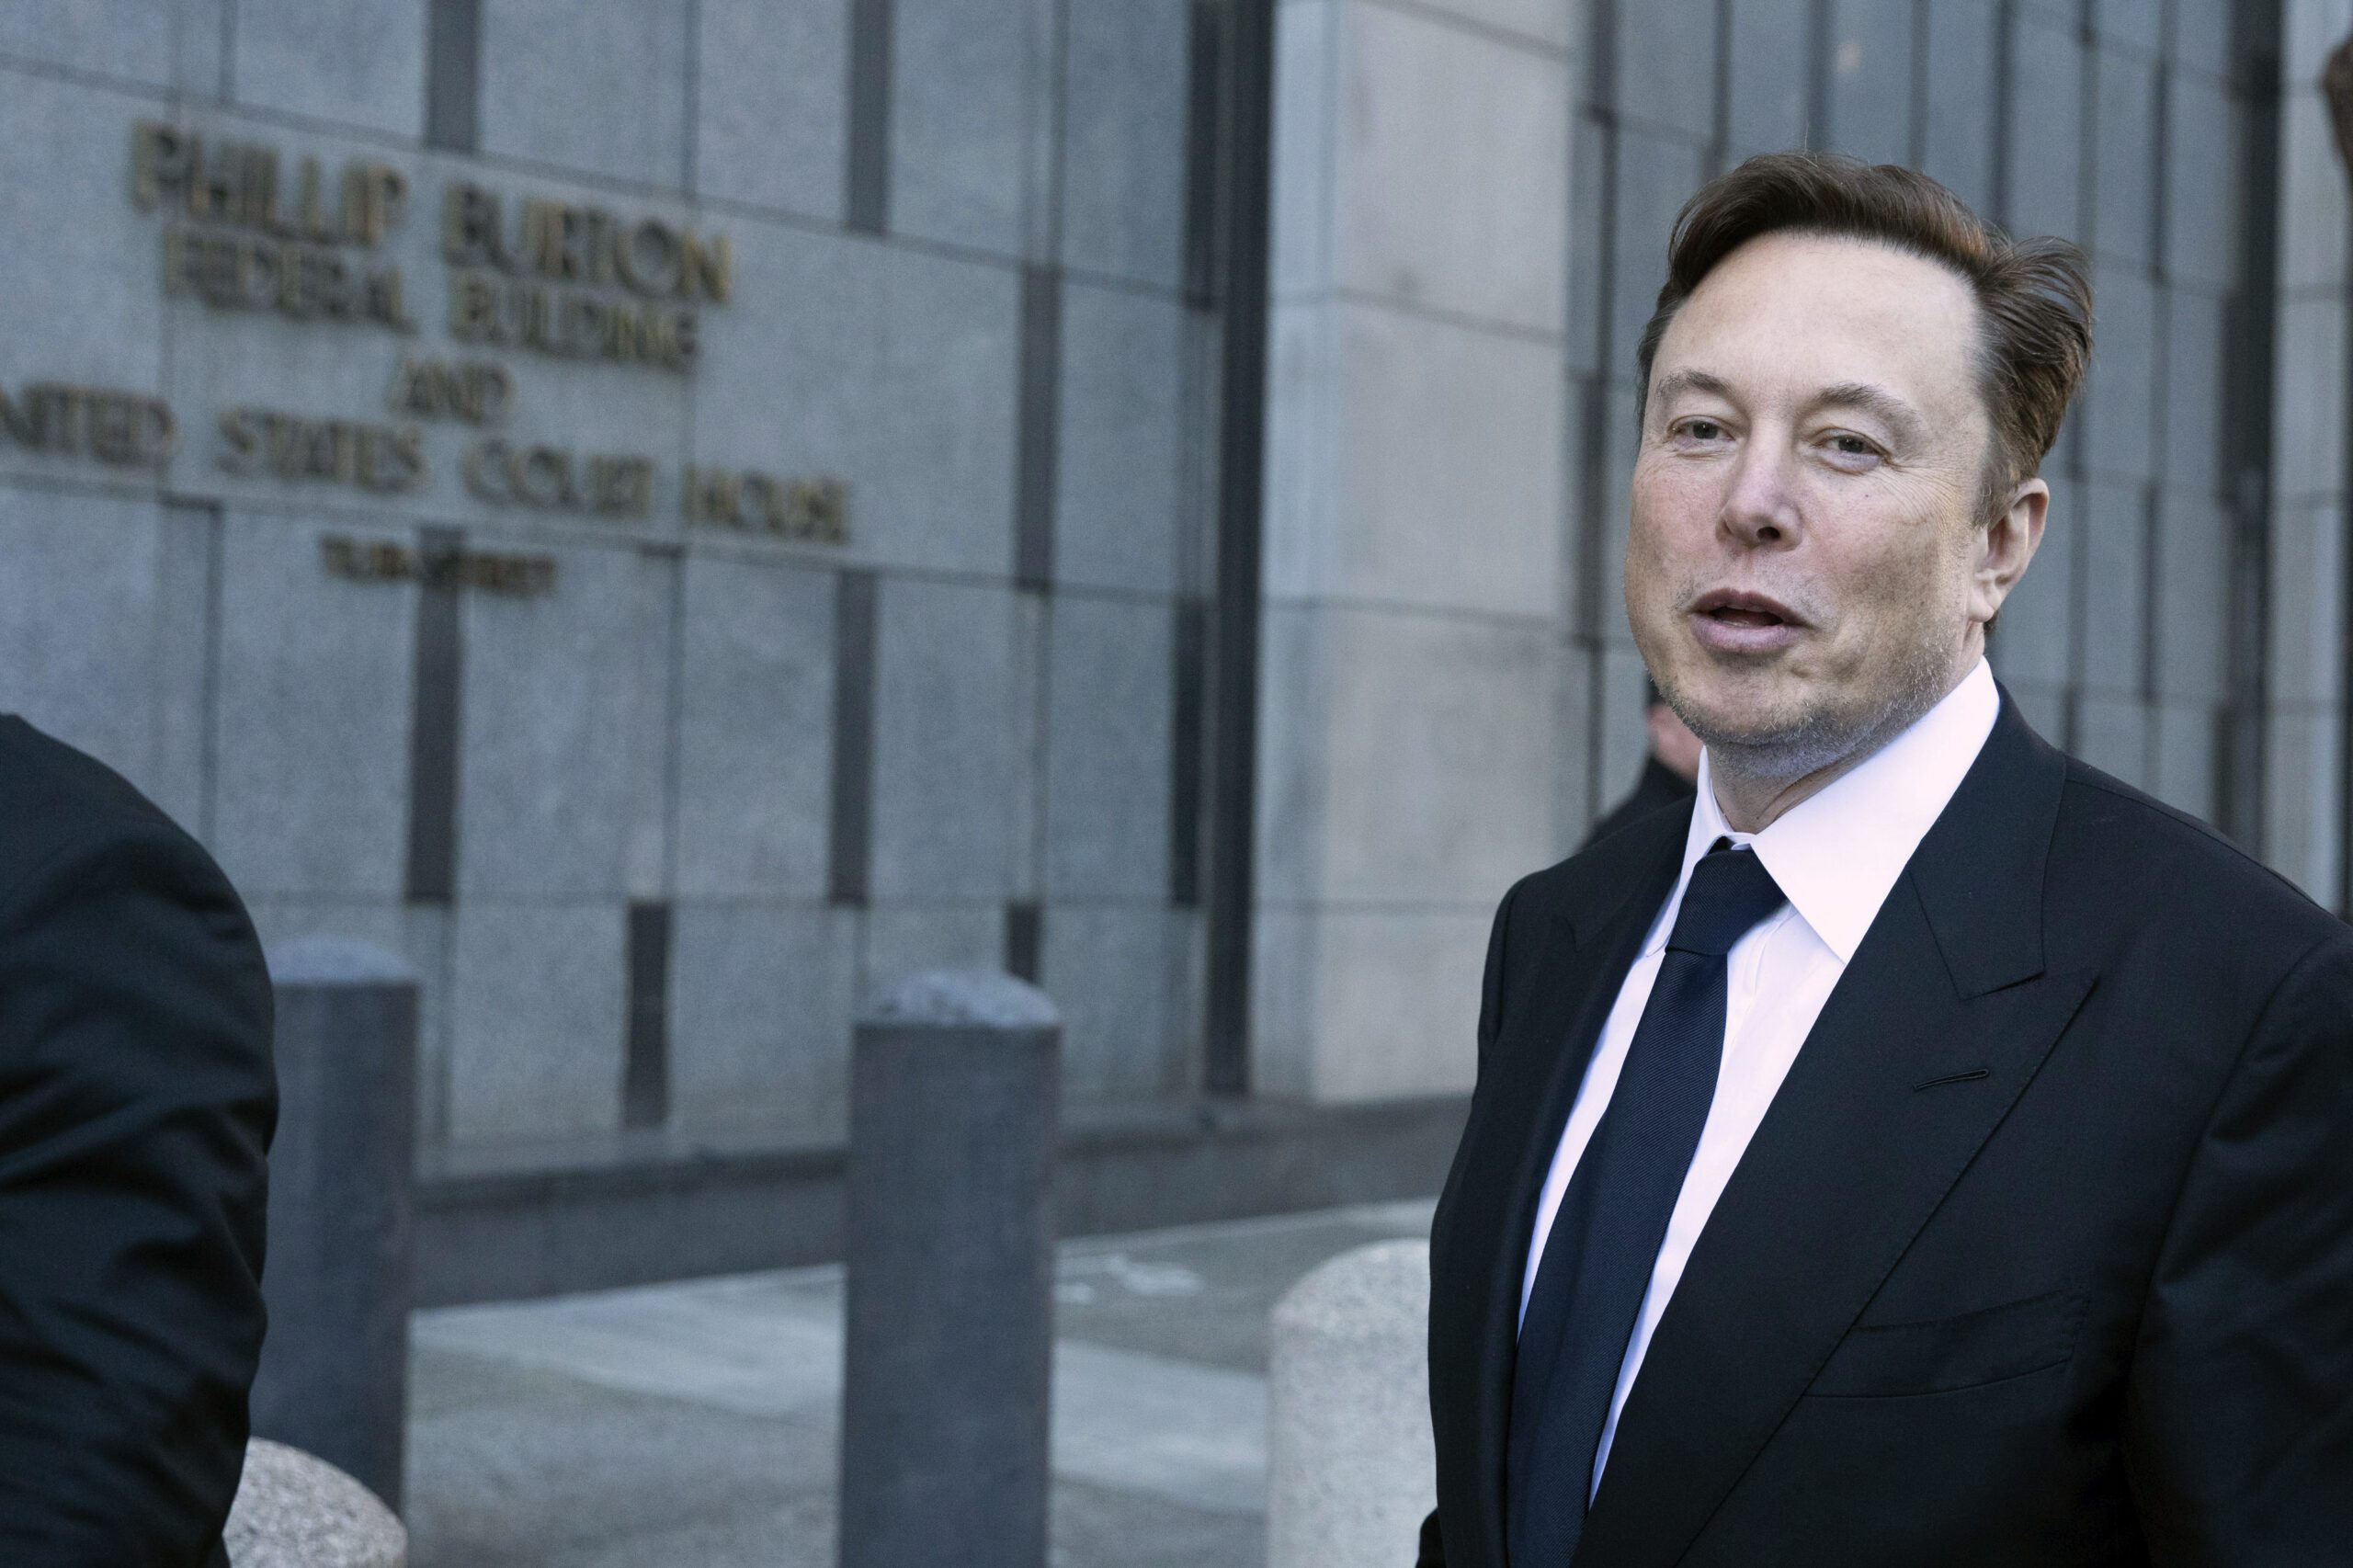 mr.-musk-goes-to-washington-to-stump-for-twitter-and-tesla